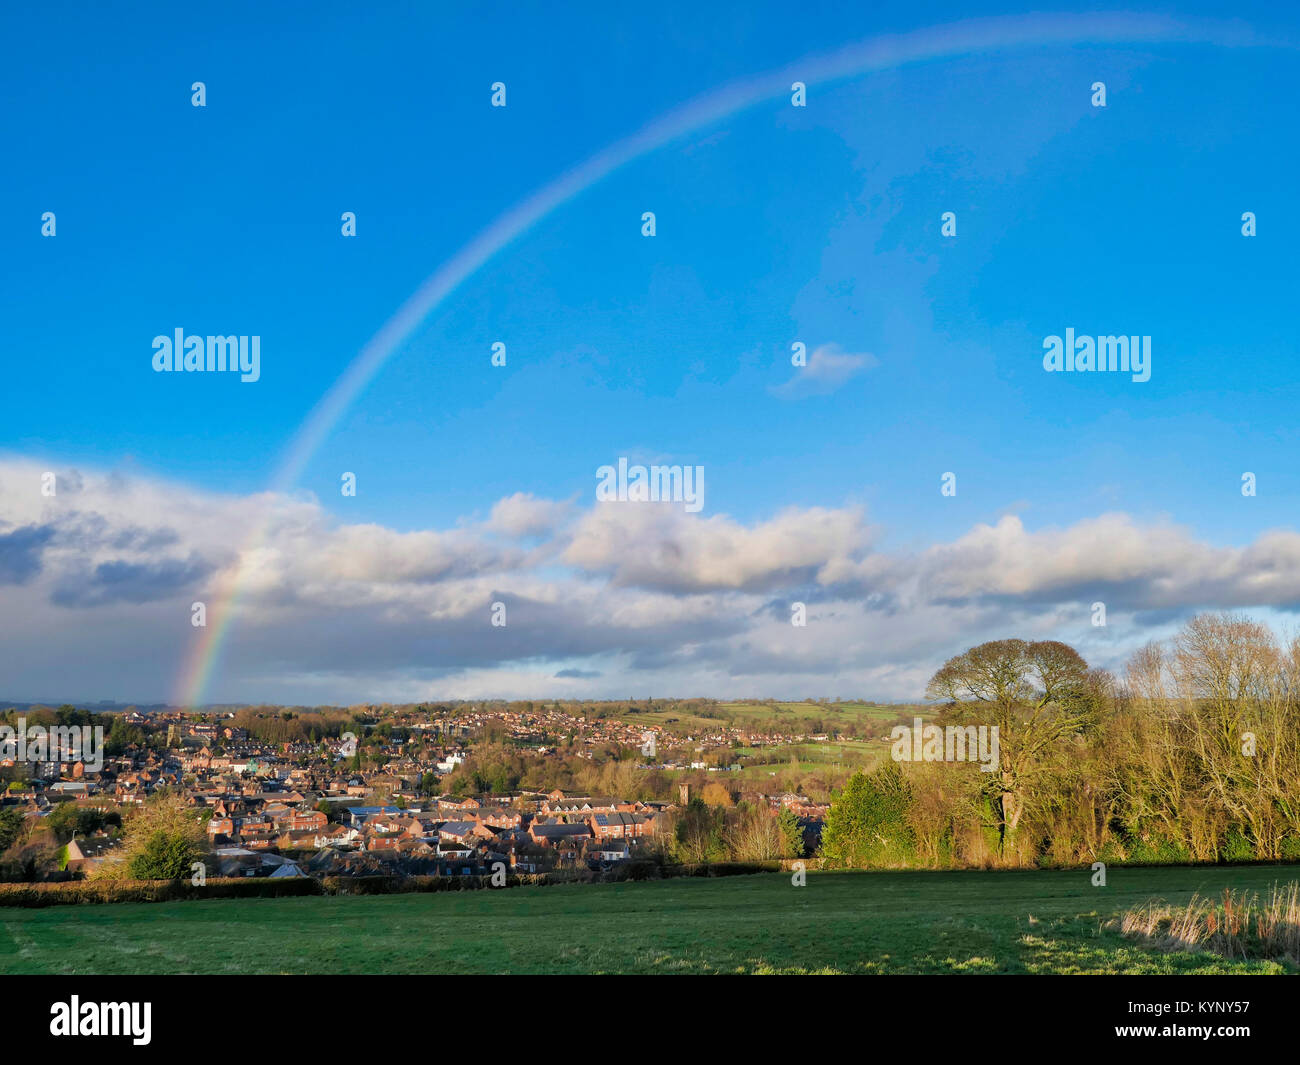 UK Weather: Snowbow rainbow over Ashbourne, Derbyshire as storms clouds approach over the gateway for the Peak District National Park Credit: Doug Blane/Alamy Live News Stock Photo